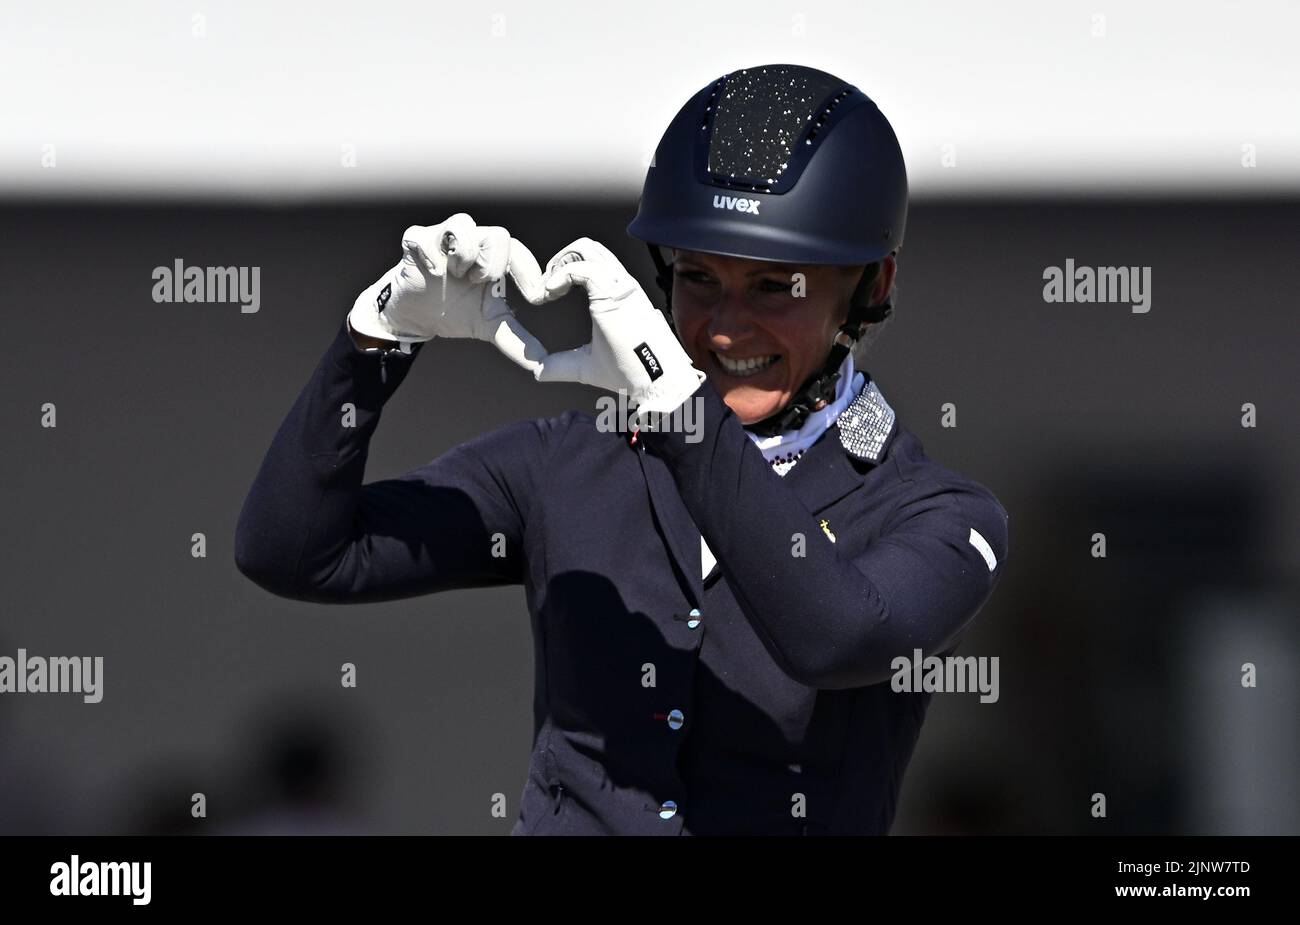 Herning. Denmark. 13 August 2022. World Equestrian Games.Ildikó Fonyódi (HUN) riding SIR SINCERE makes a heart shape with her hands at the end of her teast in the FEI Para Dressage Team championships - Grade III. Stock Photo